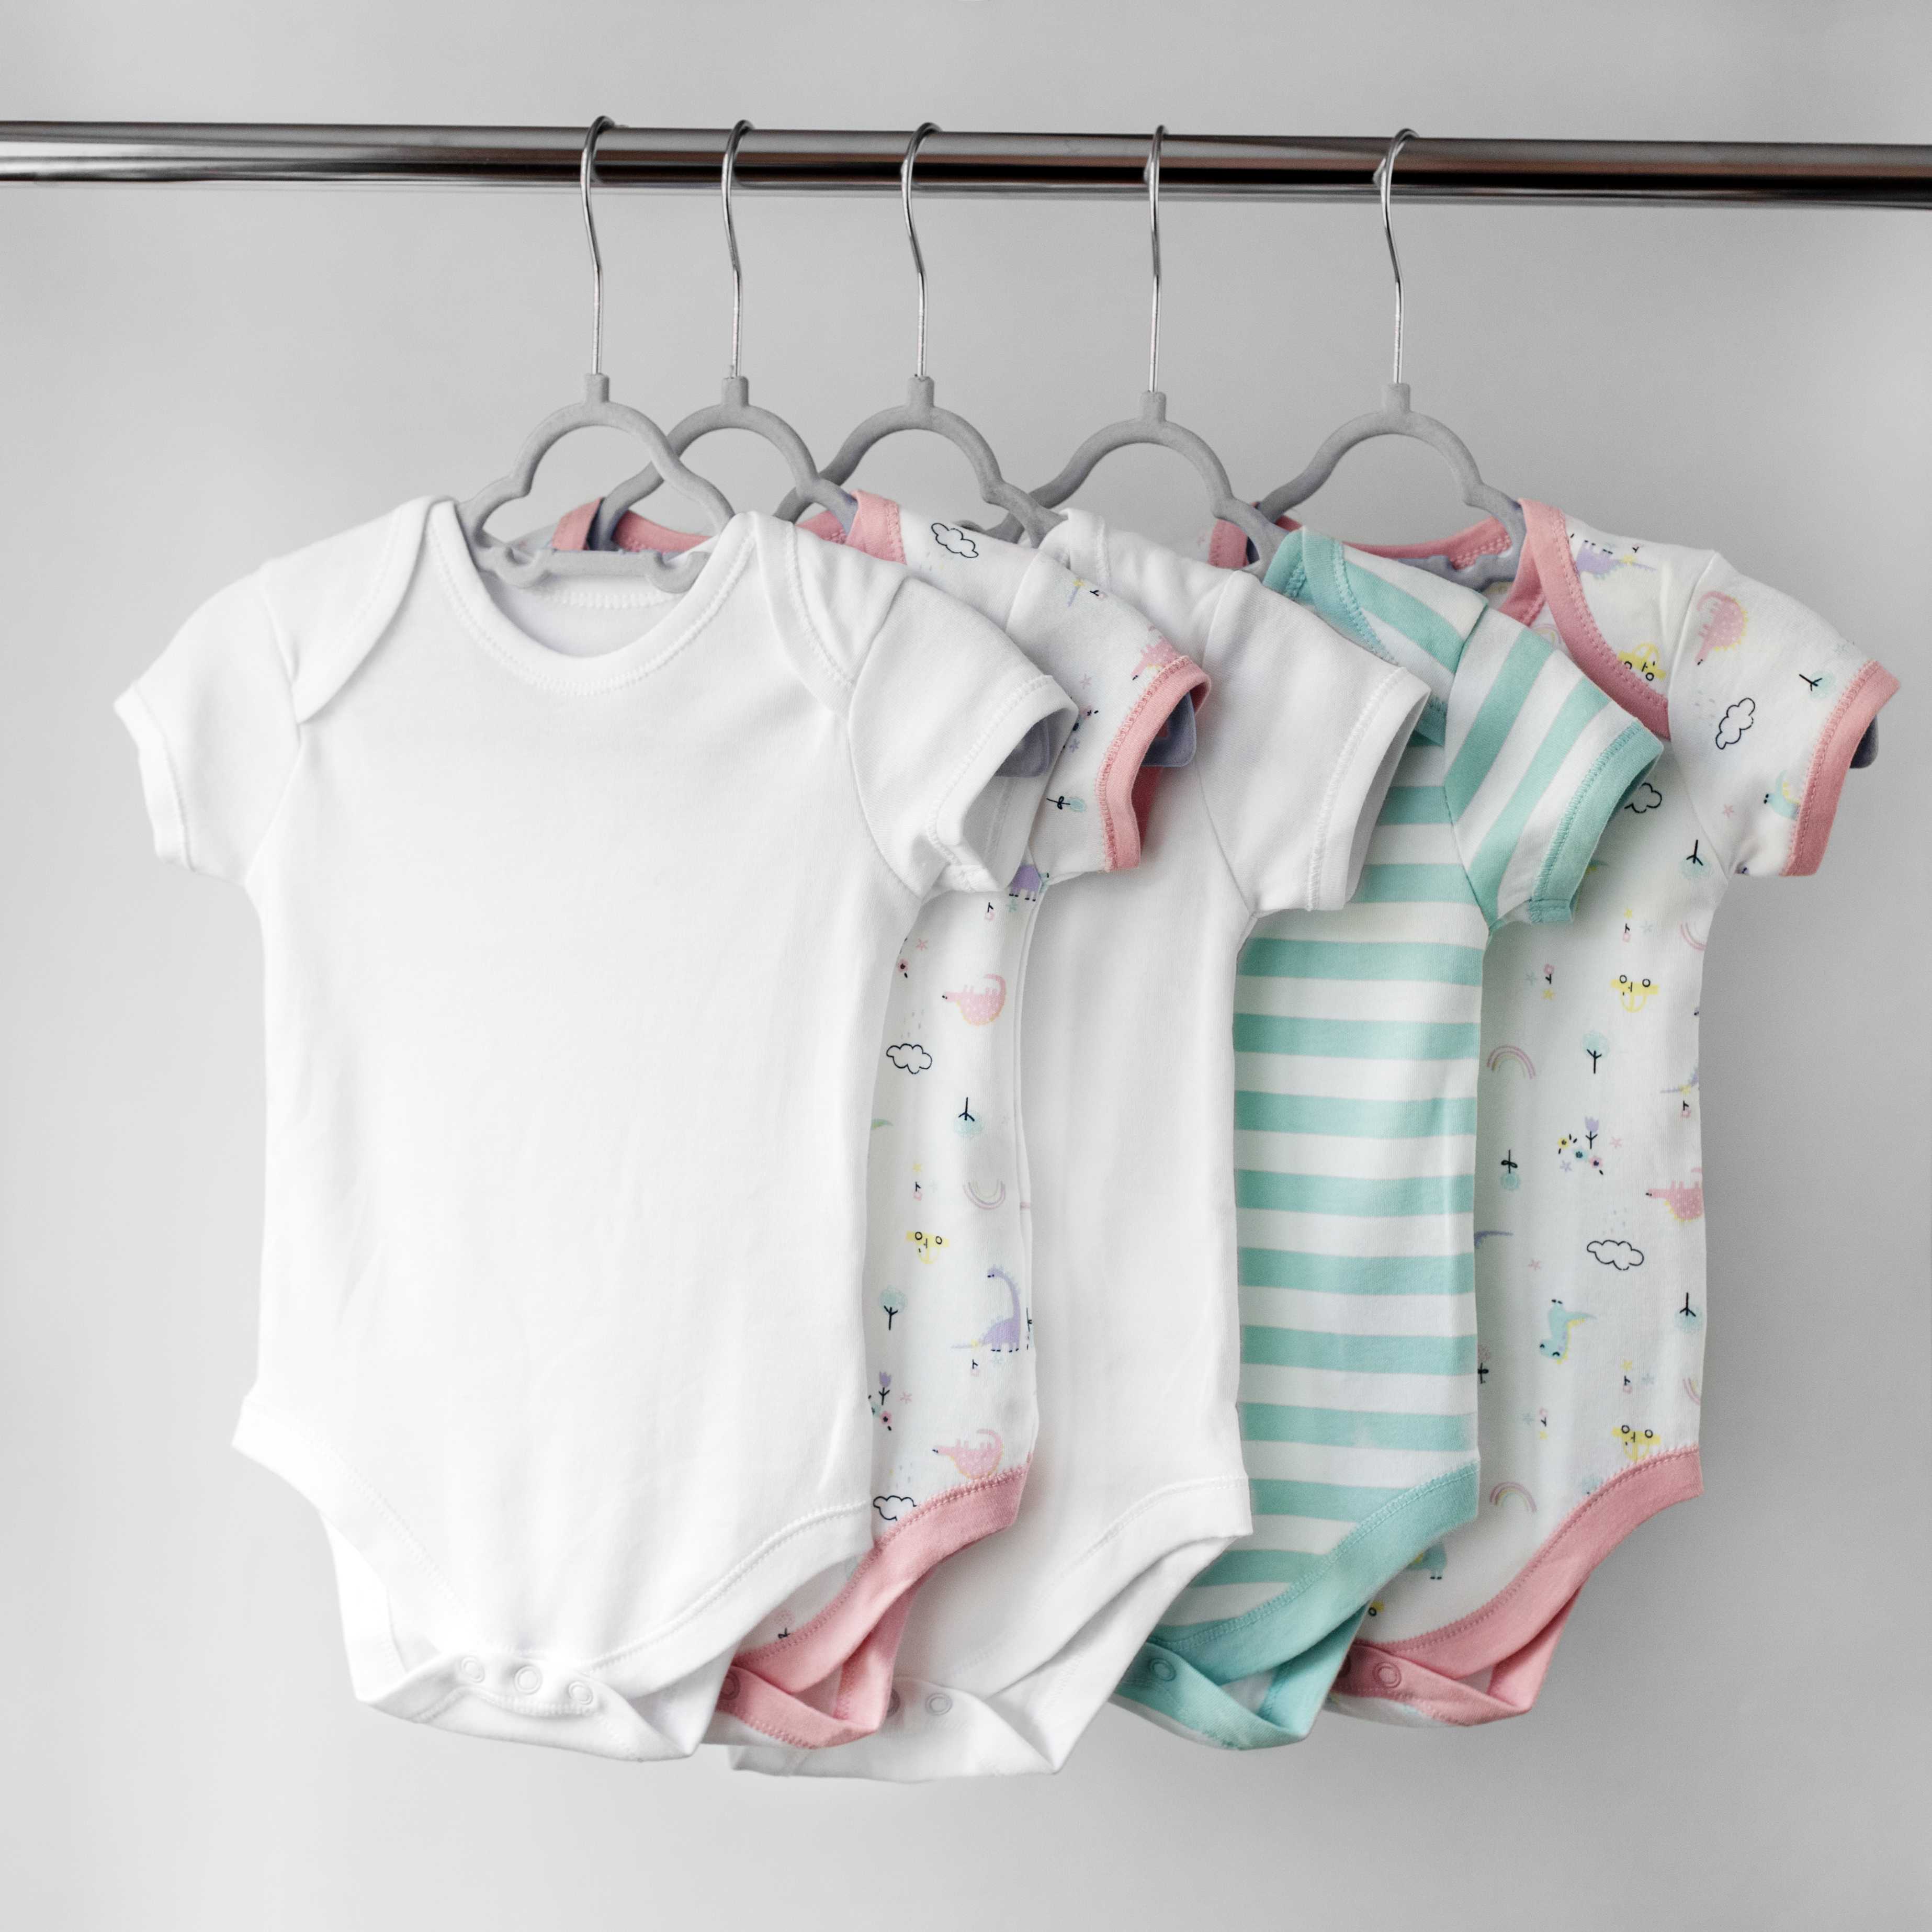 What is the best way to wash my newborn's clothes?